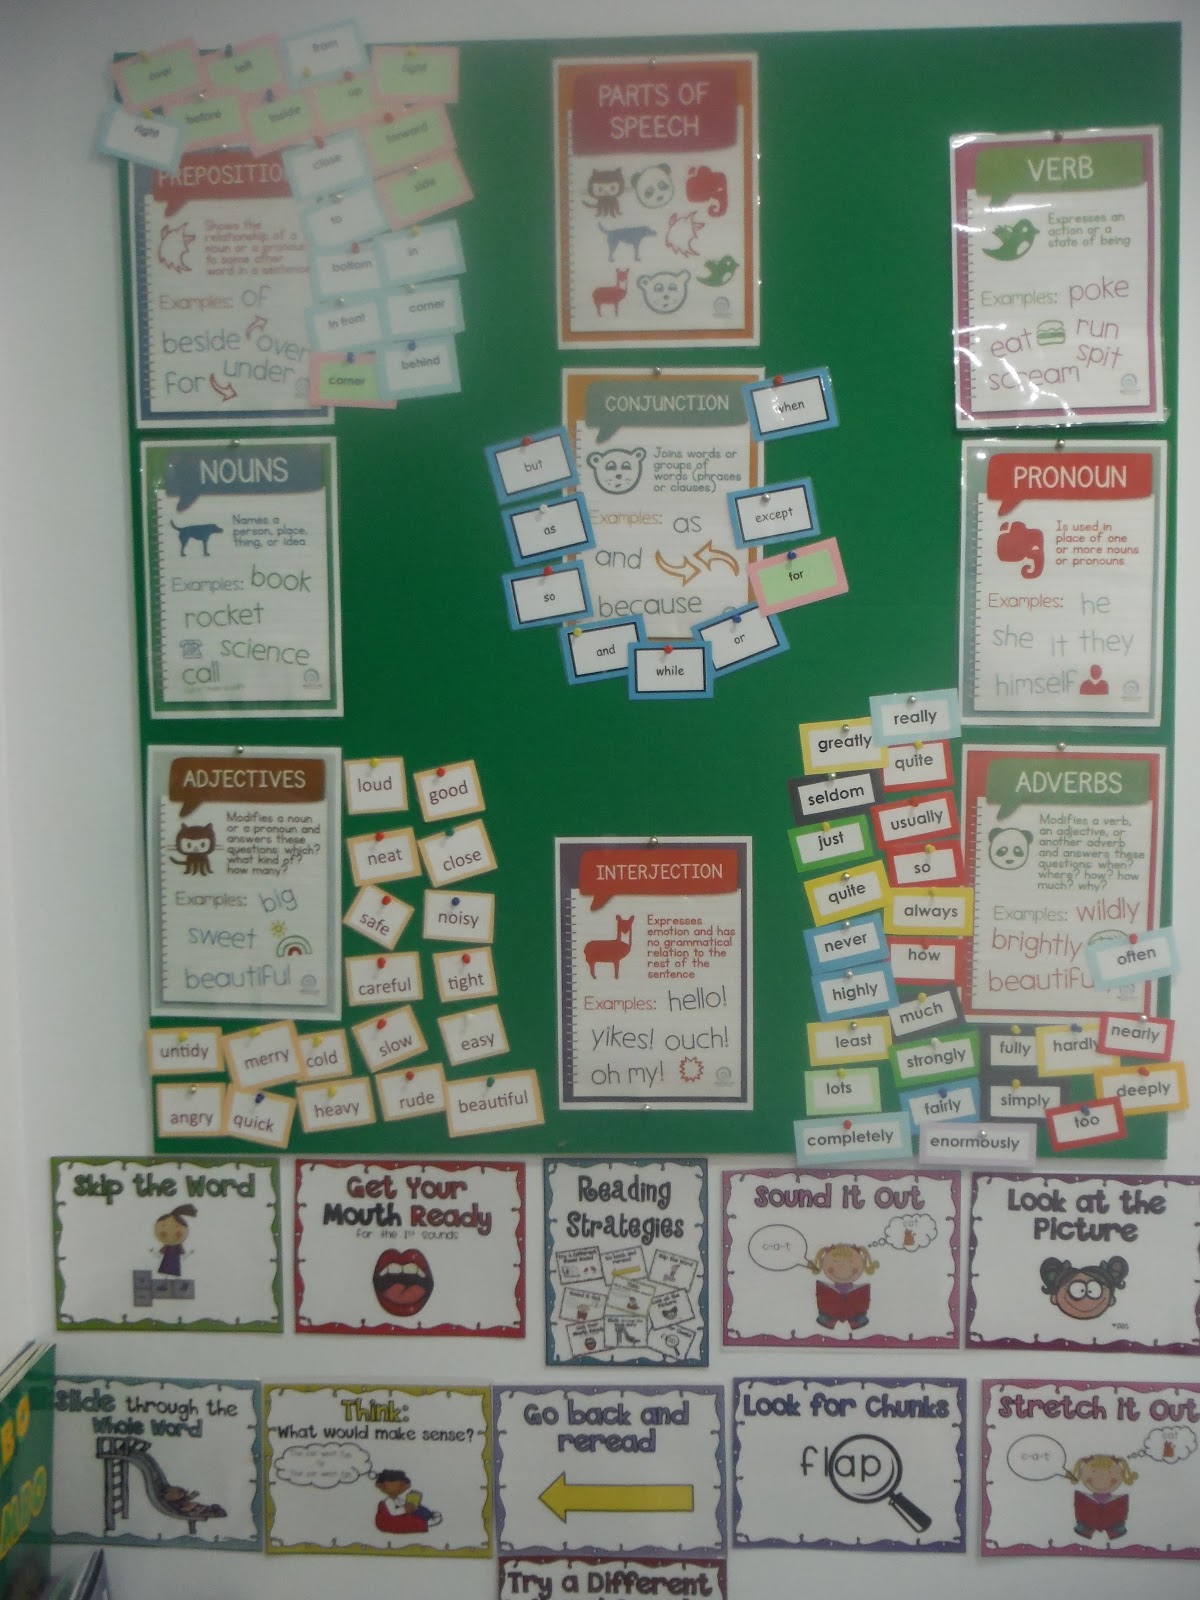 Working boards can be changed, mixed and matched for interactive learning!